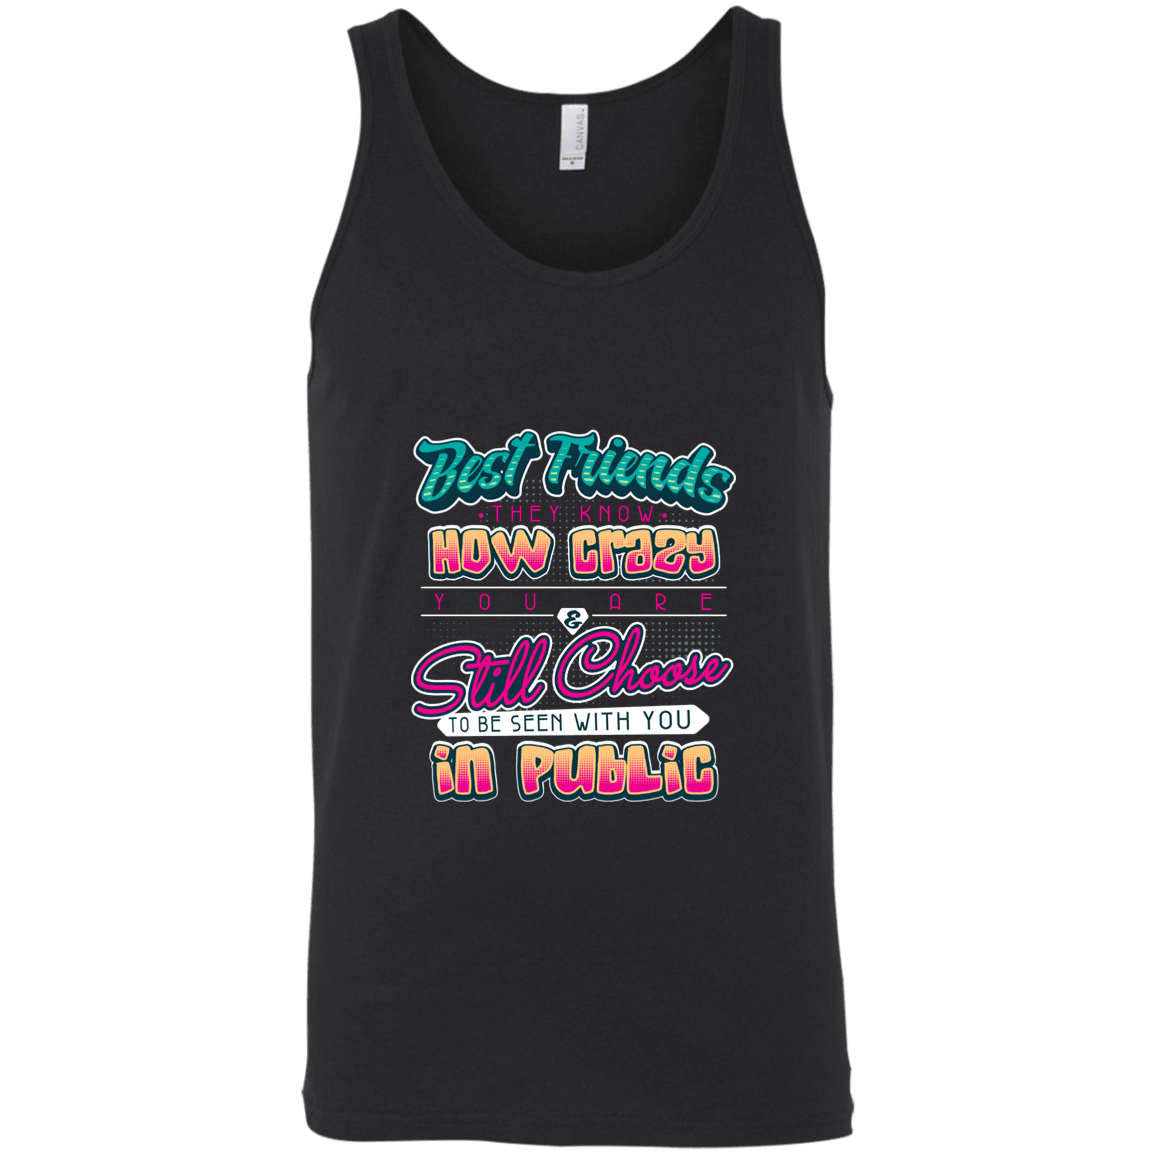 Designs by MyUtopia Shout Out:Best Friends They Know How Crazy You Are Unisex Tank,Black / X-Small,Tank Tops